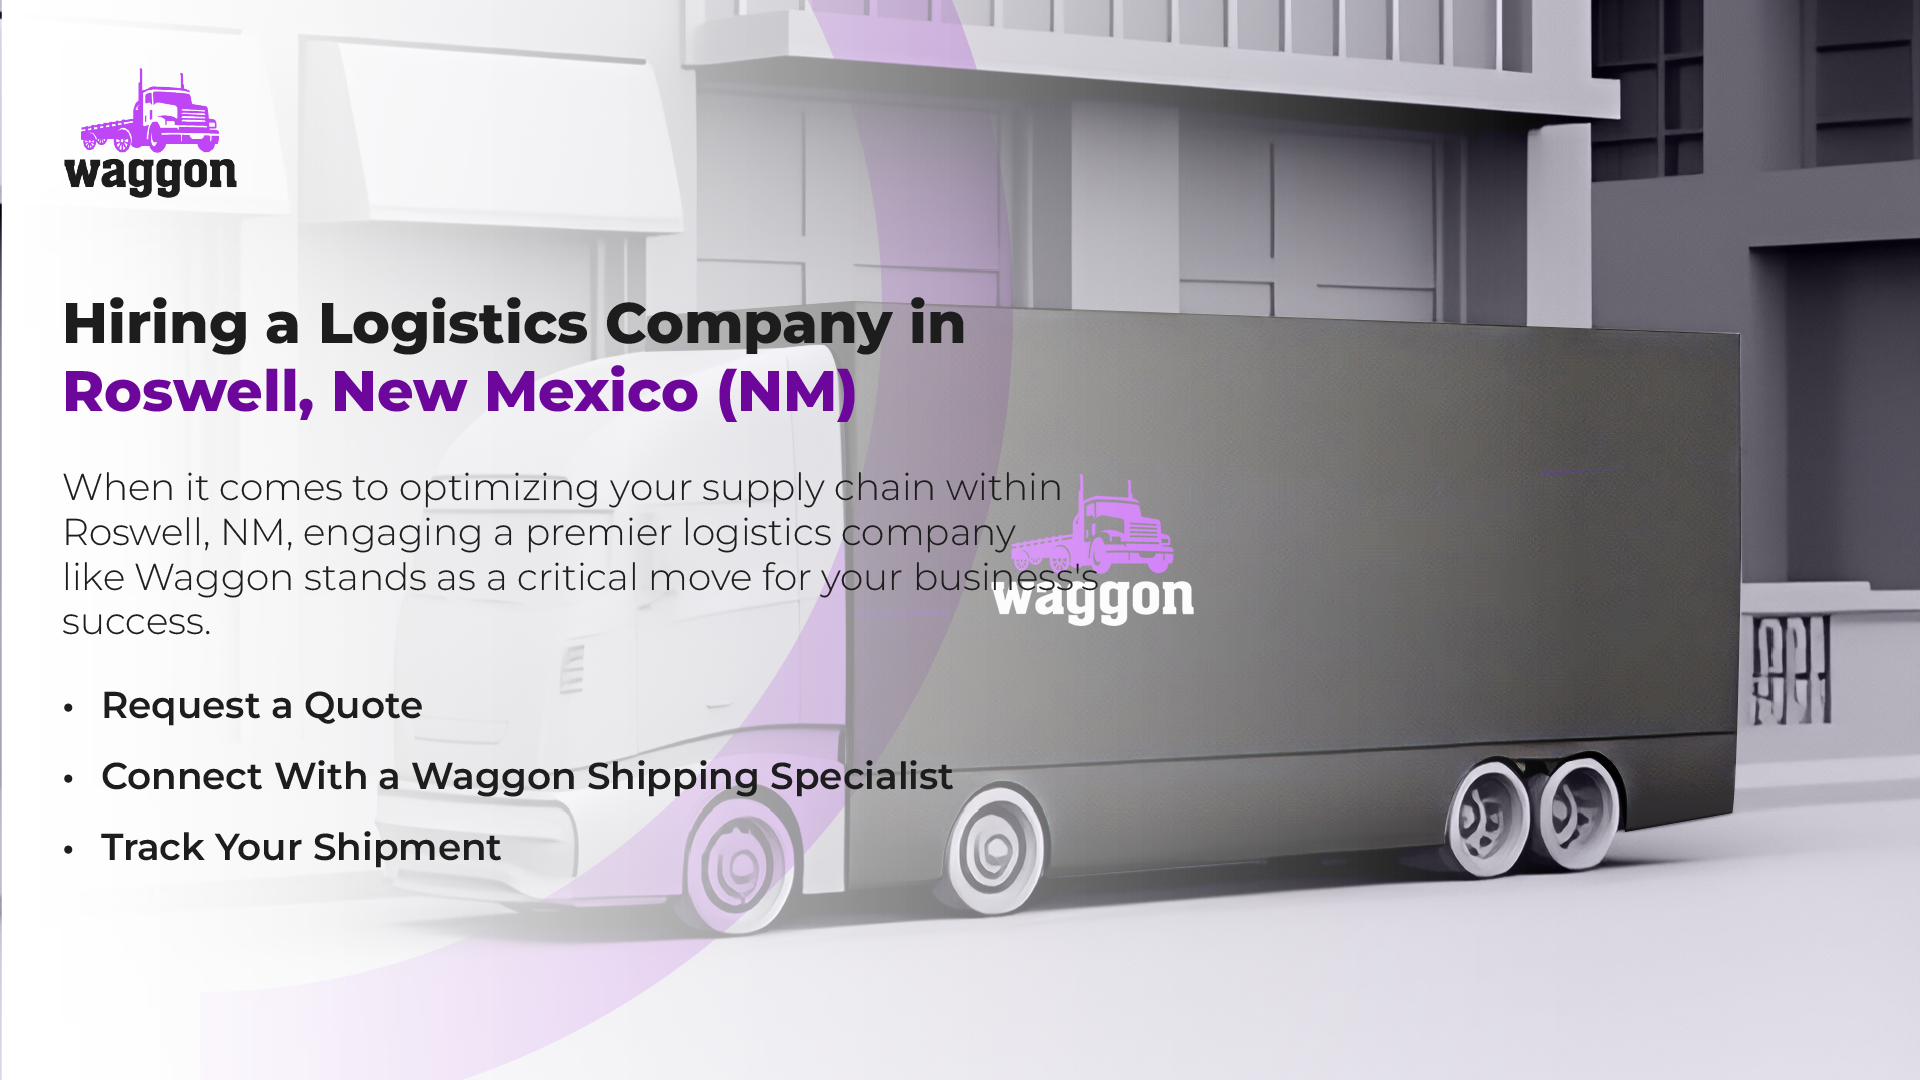 Hiring A Logistics Company in Roswell, New Mexico (NM)